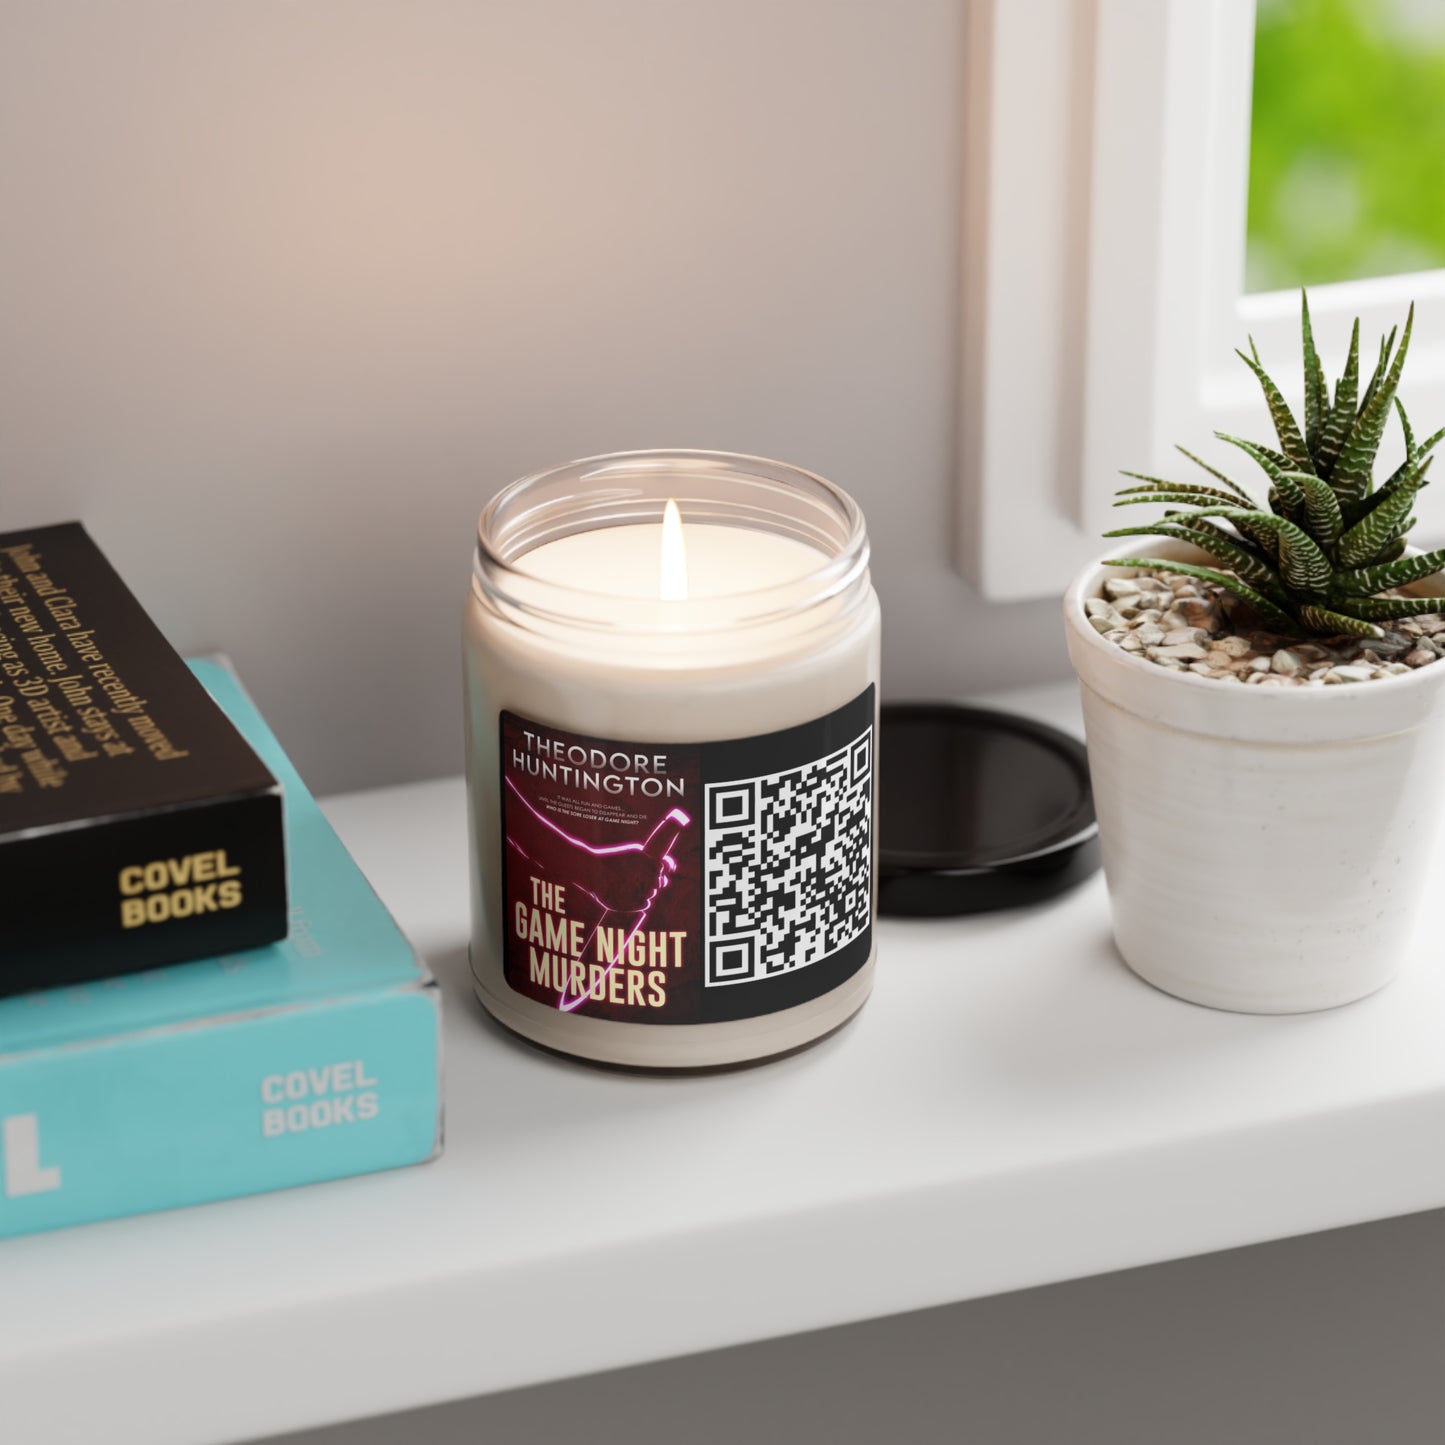 The Game Night Murders - Scented Soy Candle